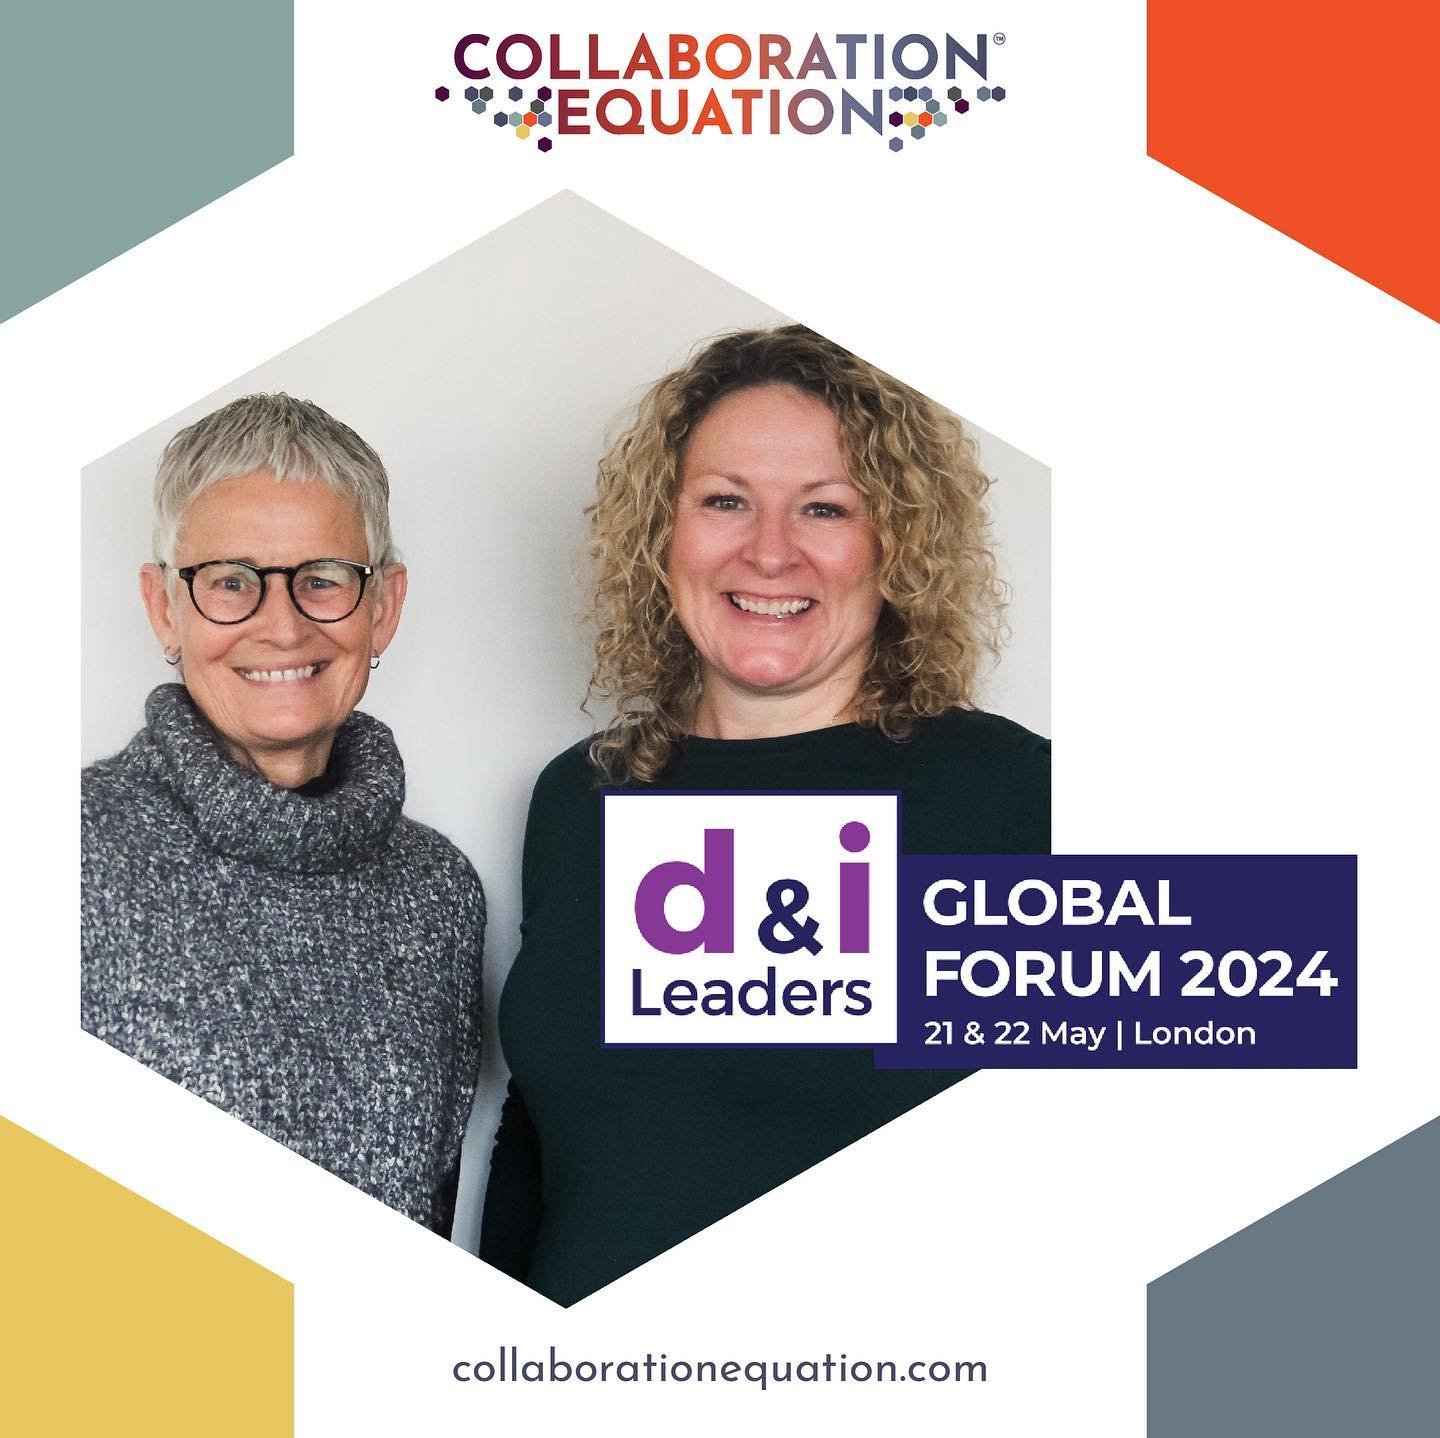 Preparation is going well and the time is drawing nearer!

On May 21st and 22nd, my dear friend Lucy Kidd and I will be exhibiting our Collaboration EquationTM at the @di_leaders (Diversity and Inclusion Leaders) Global Forum 2024 in London.

We will